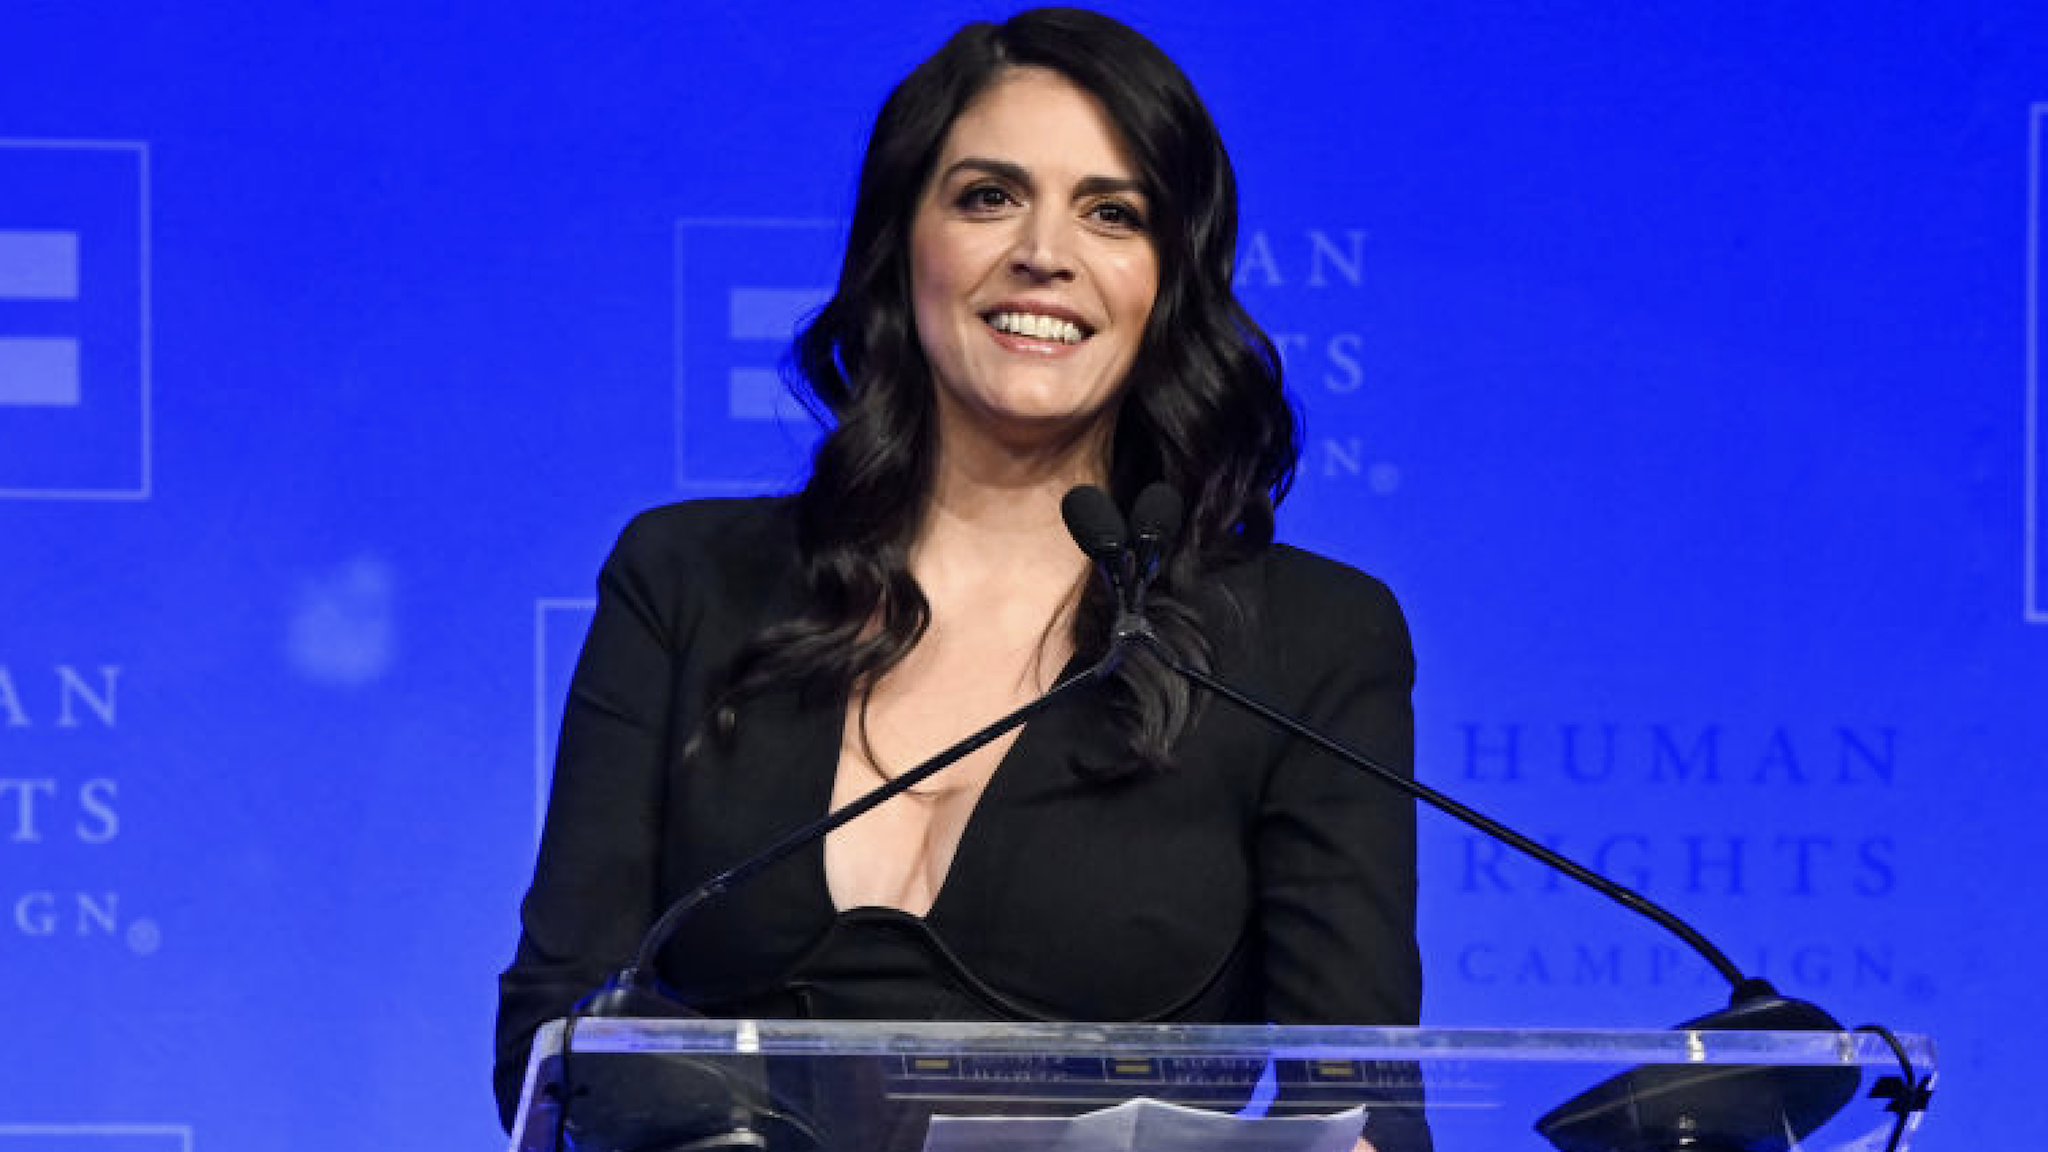 Cecily Strong speaks onstage at the Human Rights Campaign 2023 Greater New York Dinner at Marriott Marquis Times Square on February 04, 2023 in New York City.